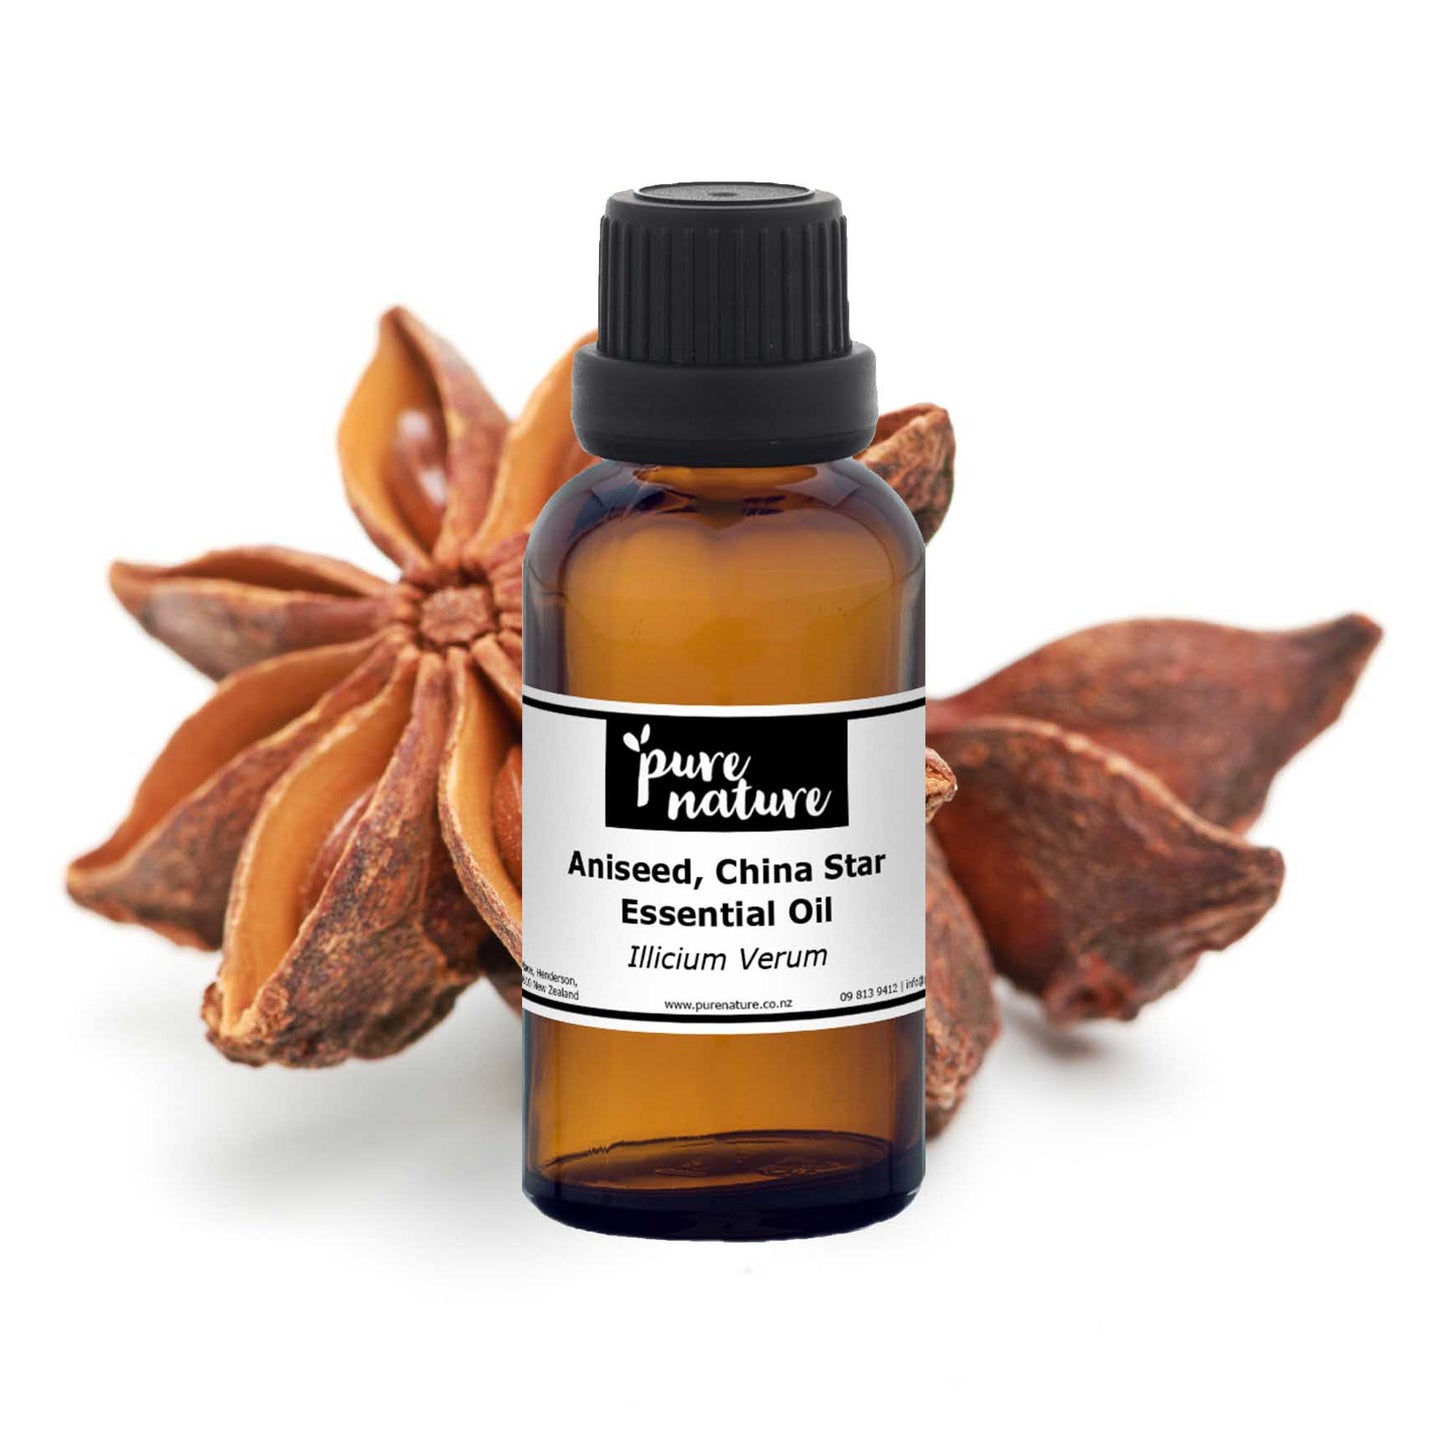 Aniseed, China Star Essential Oil